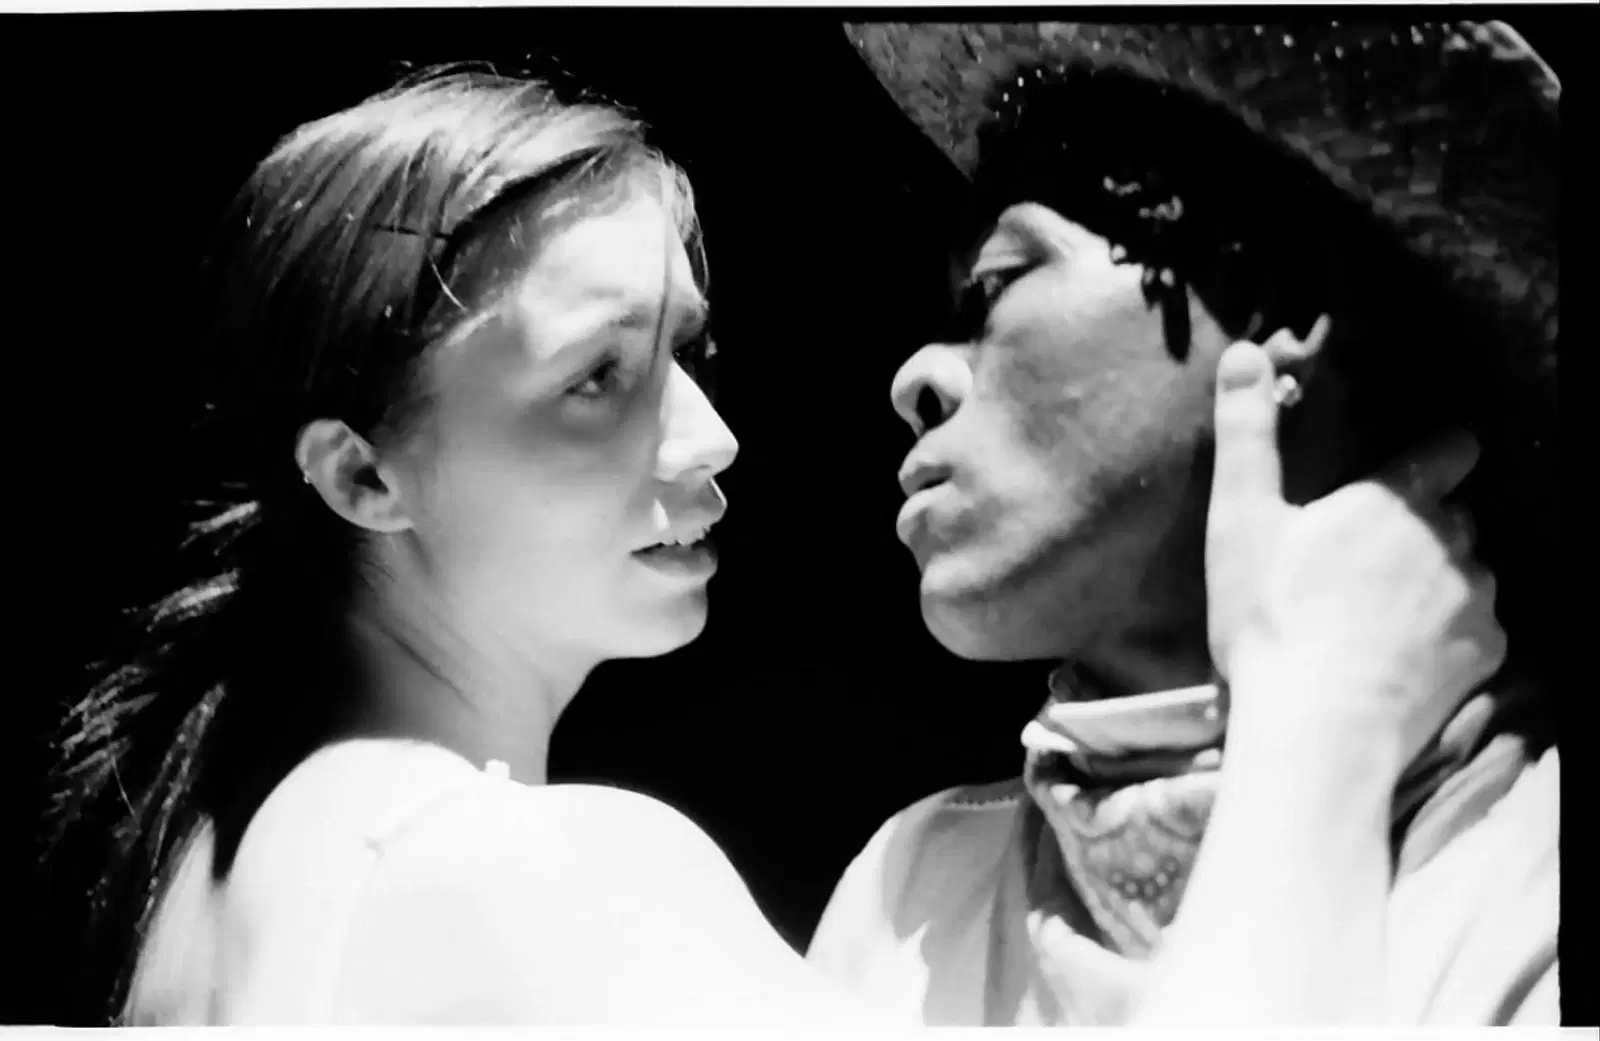 Intense black and white scene of a man and a woman gazing into each other's eyes, conveying a moment of deep connection or confrontation. the man wears a hat and bandana, suggesting a costume, while the woman's bare shoulders and earnest expression add to the dramatic atmosphere.